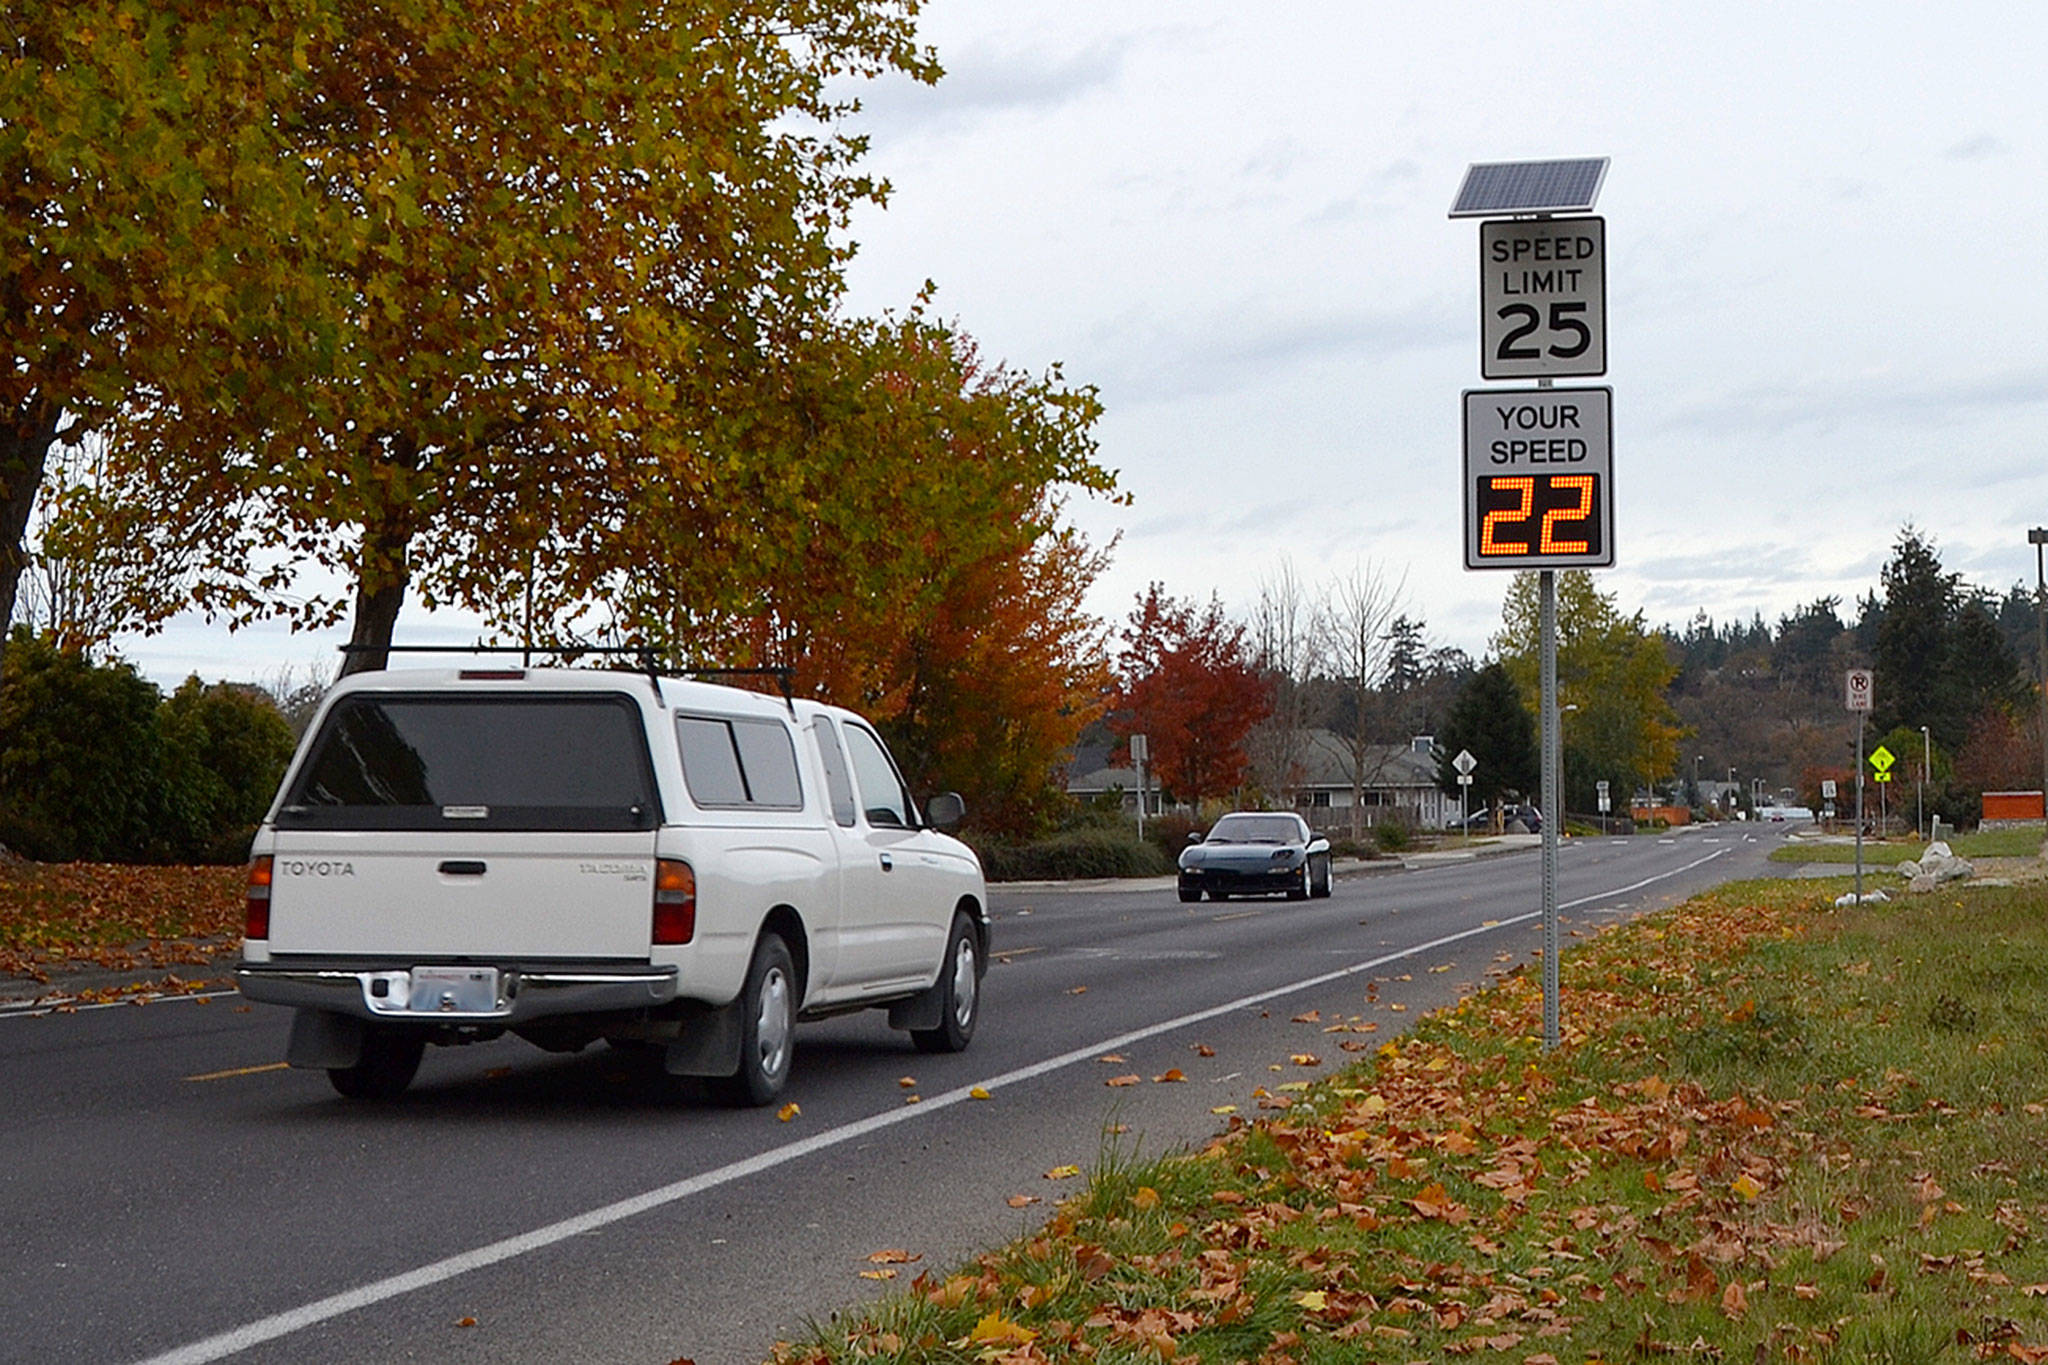 The first of 19 speed signs are up in the City of Sequim, including this sign on Blake Avenue by Carrie Blake Community Park. City of Sequim staff said a few are being installed each week. Sequim Gazette photo by Matthew Nash